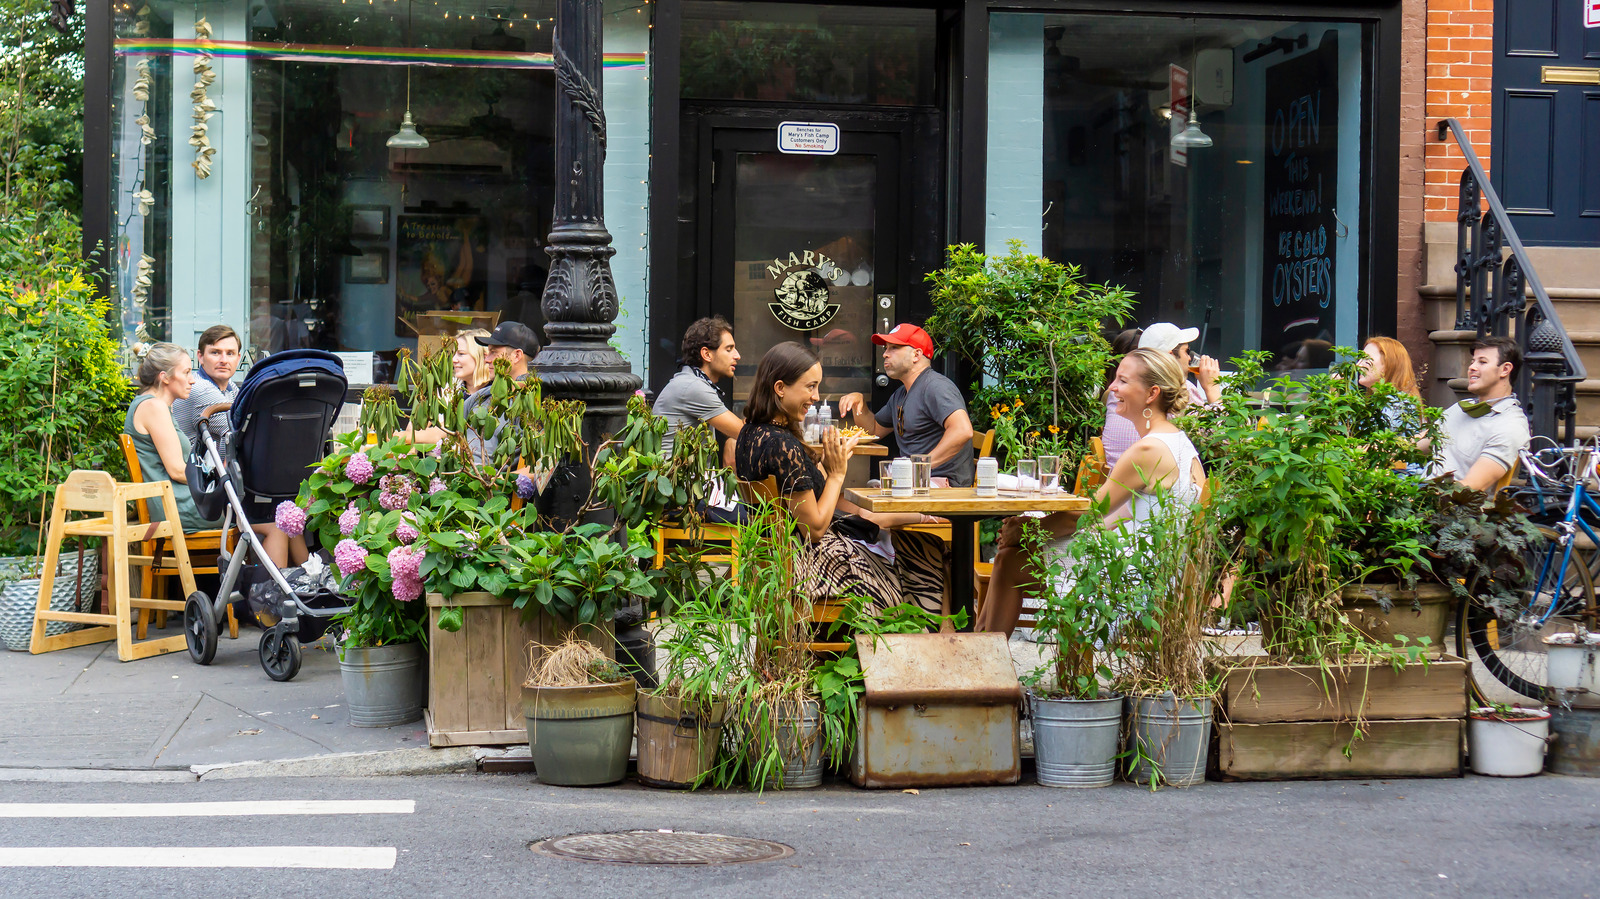 Nyc Passes Bill To Permanently Make Outdoor Dining Legal 0619